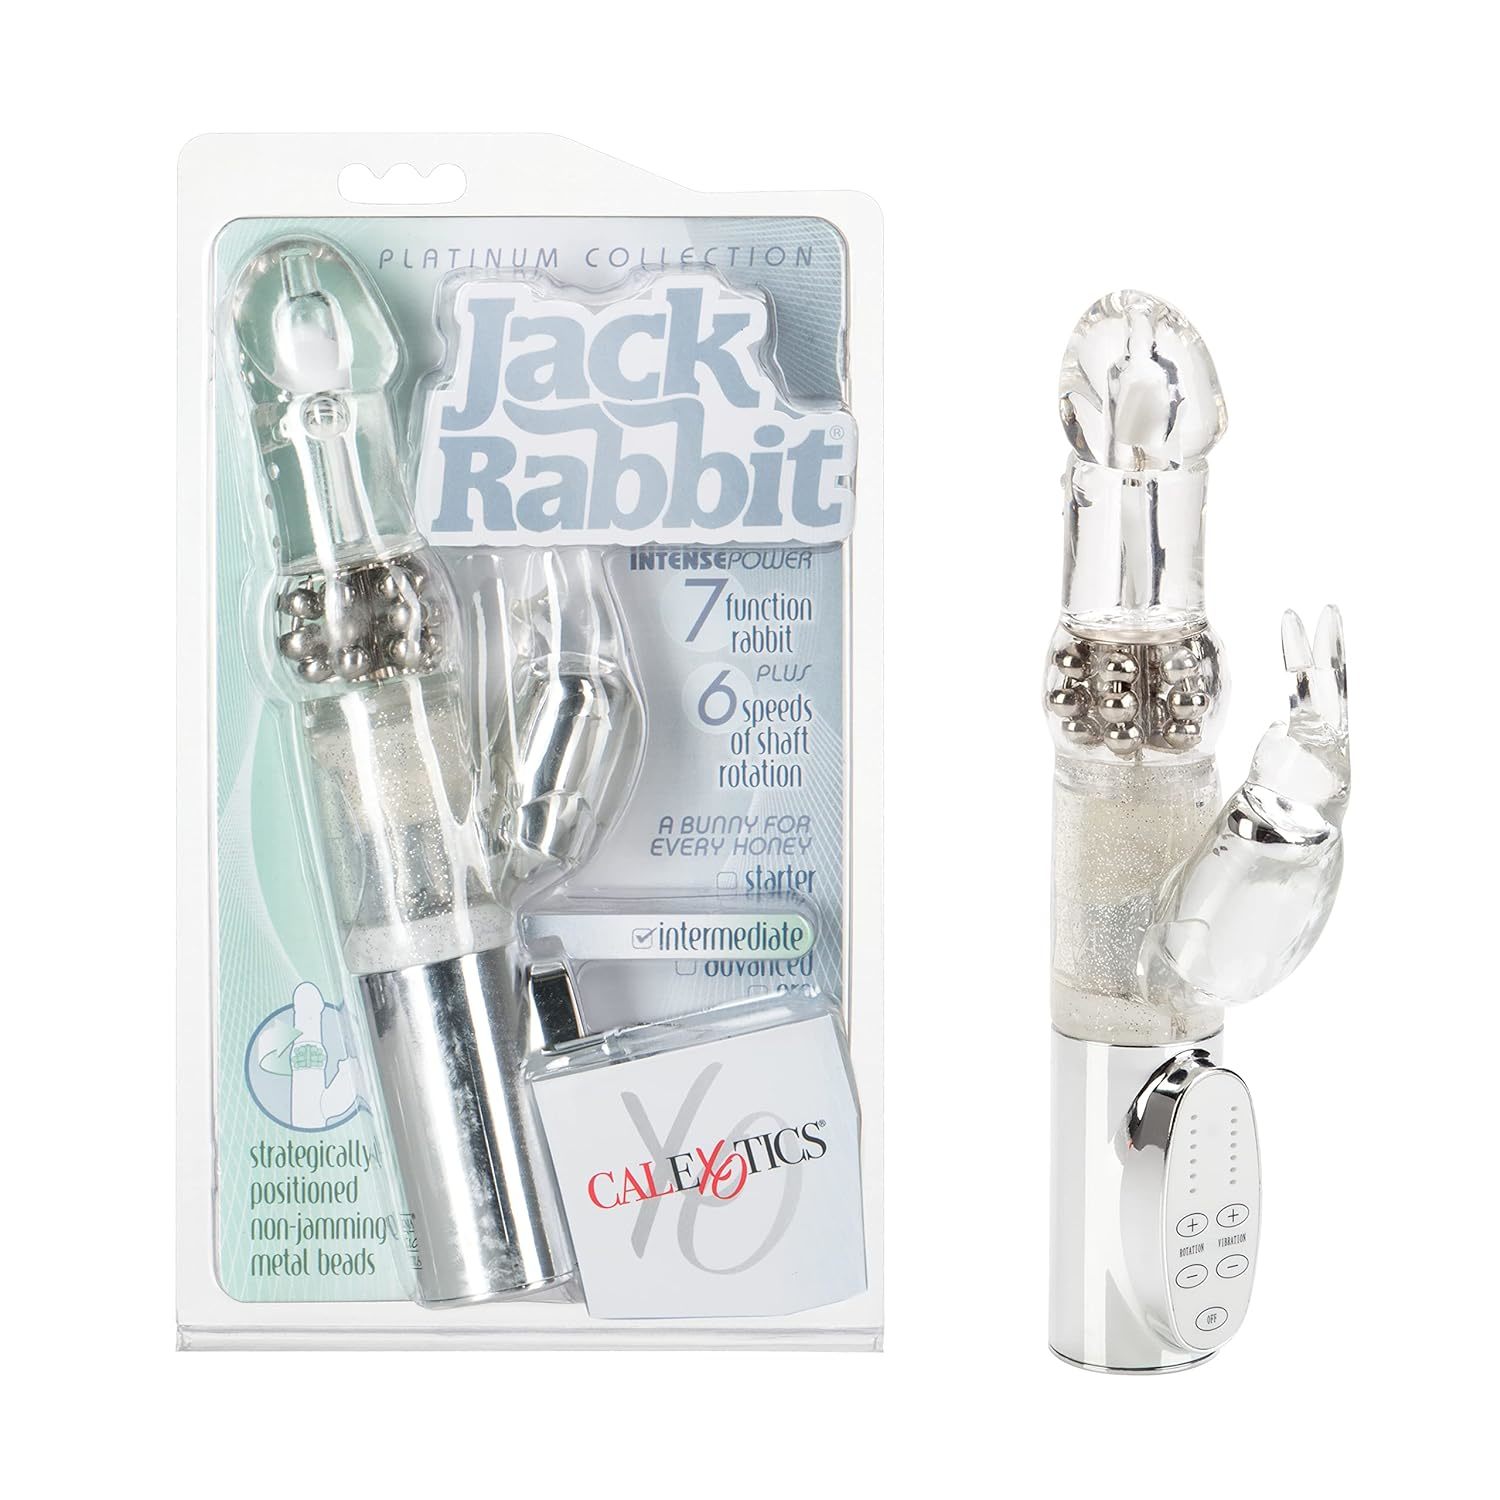 Primary image for 7-Function Platinum Jack Rabbit Vibrator With Rotation - Waterproof Vibe Sex Toy